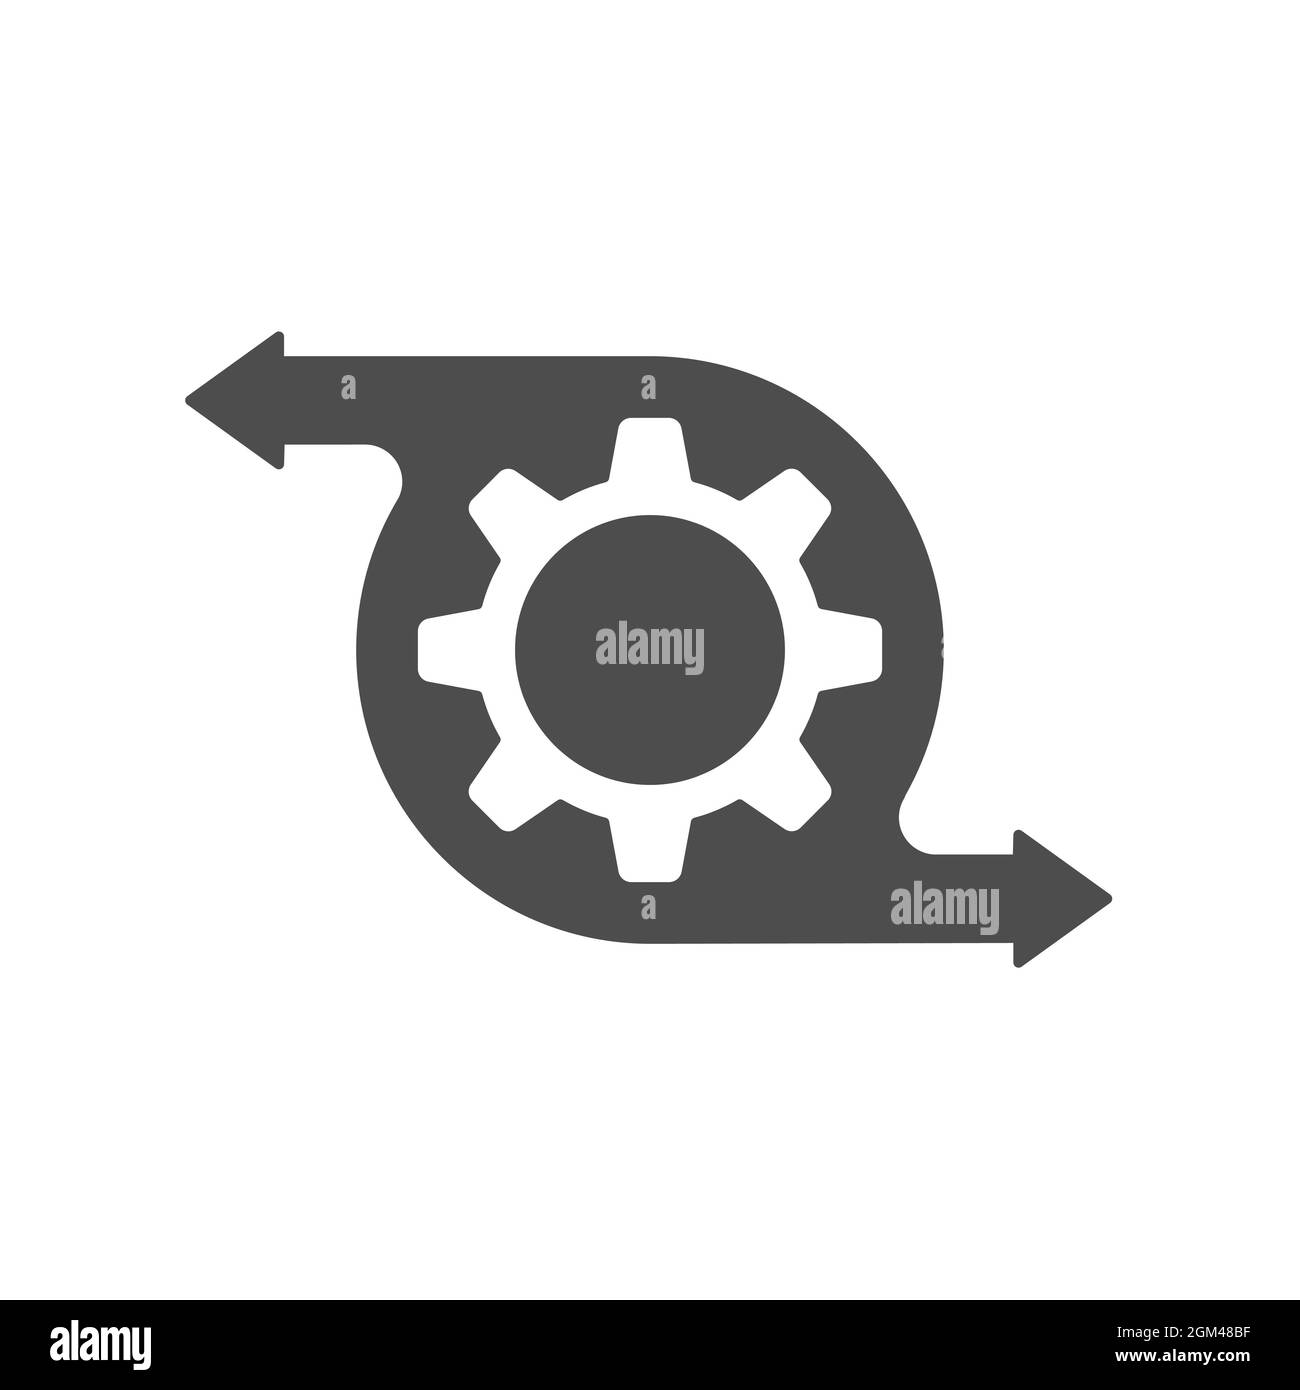 icon of the management or optimization process. The gear icon with directional arrows. Stock vector illustration. Stock Vector